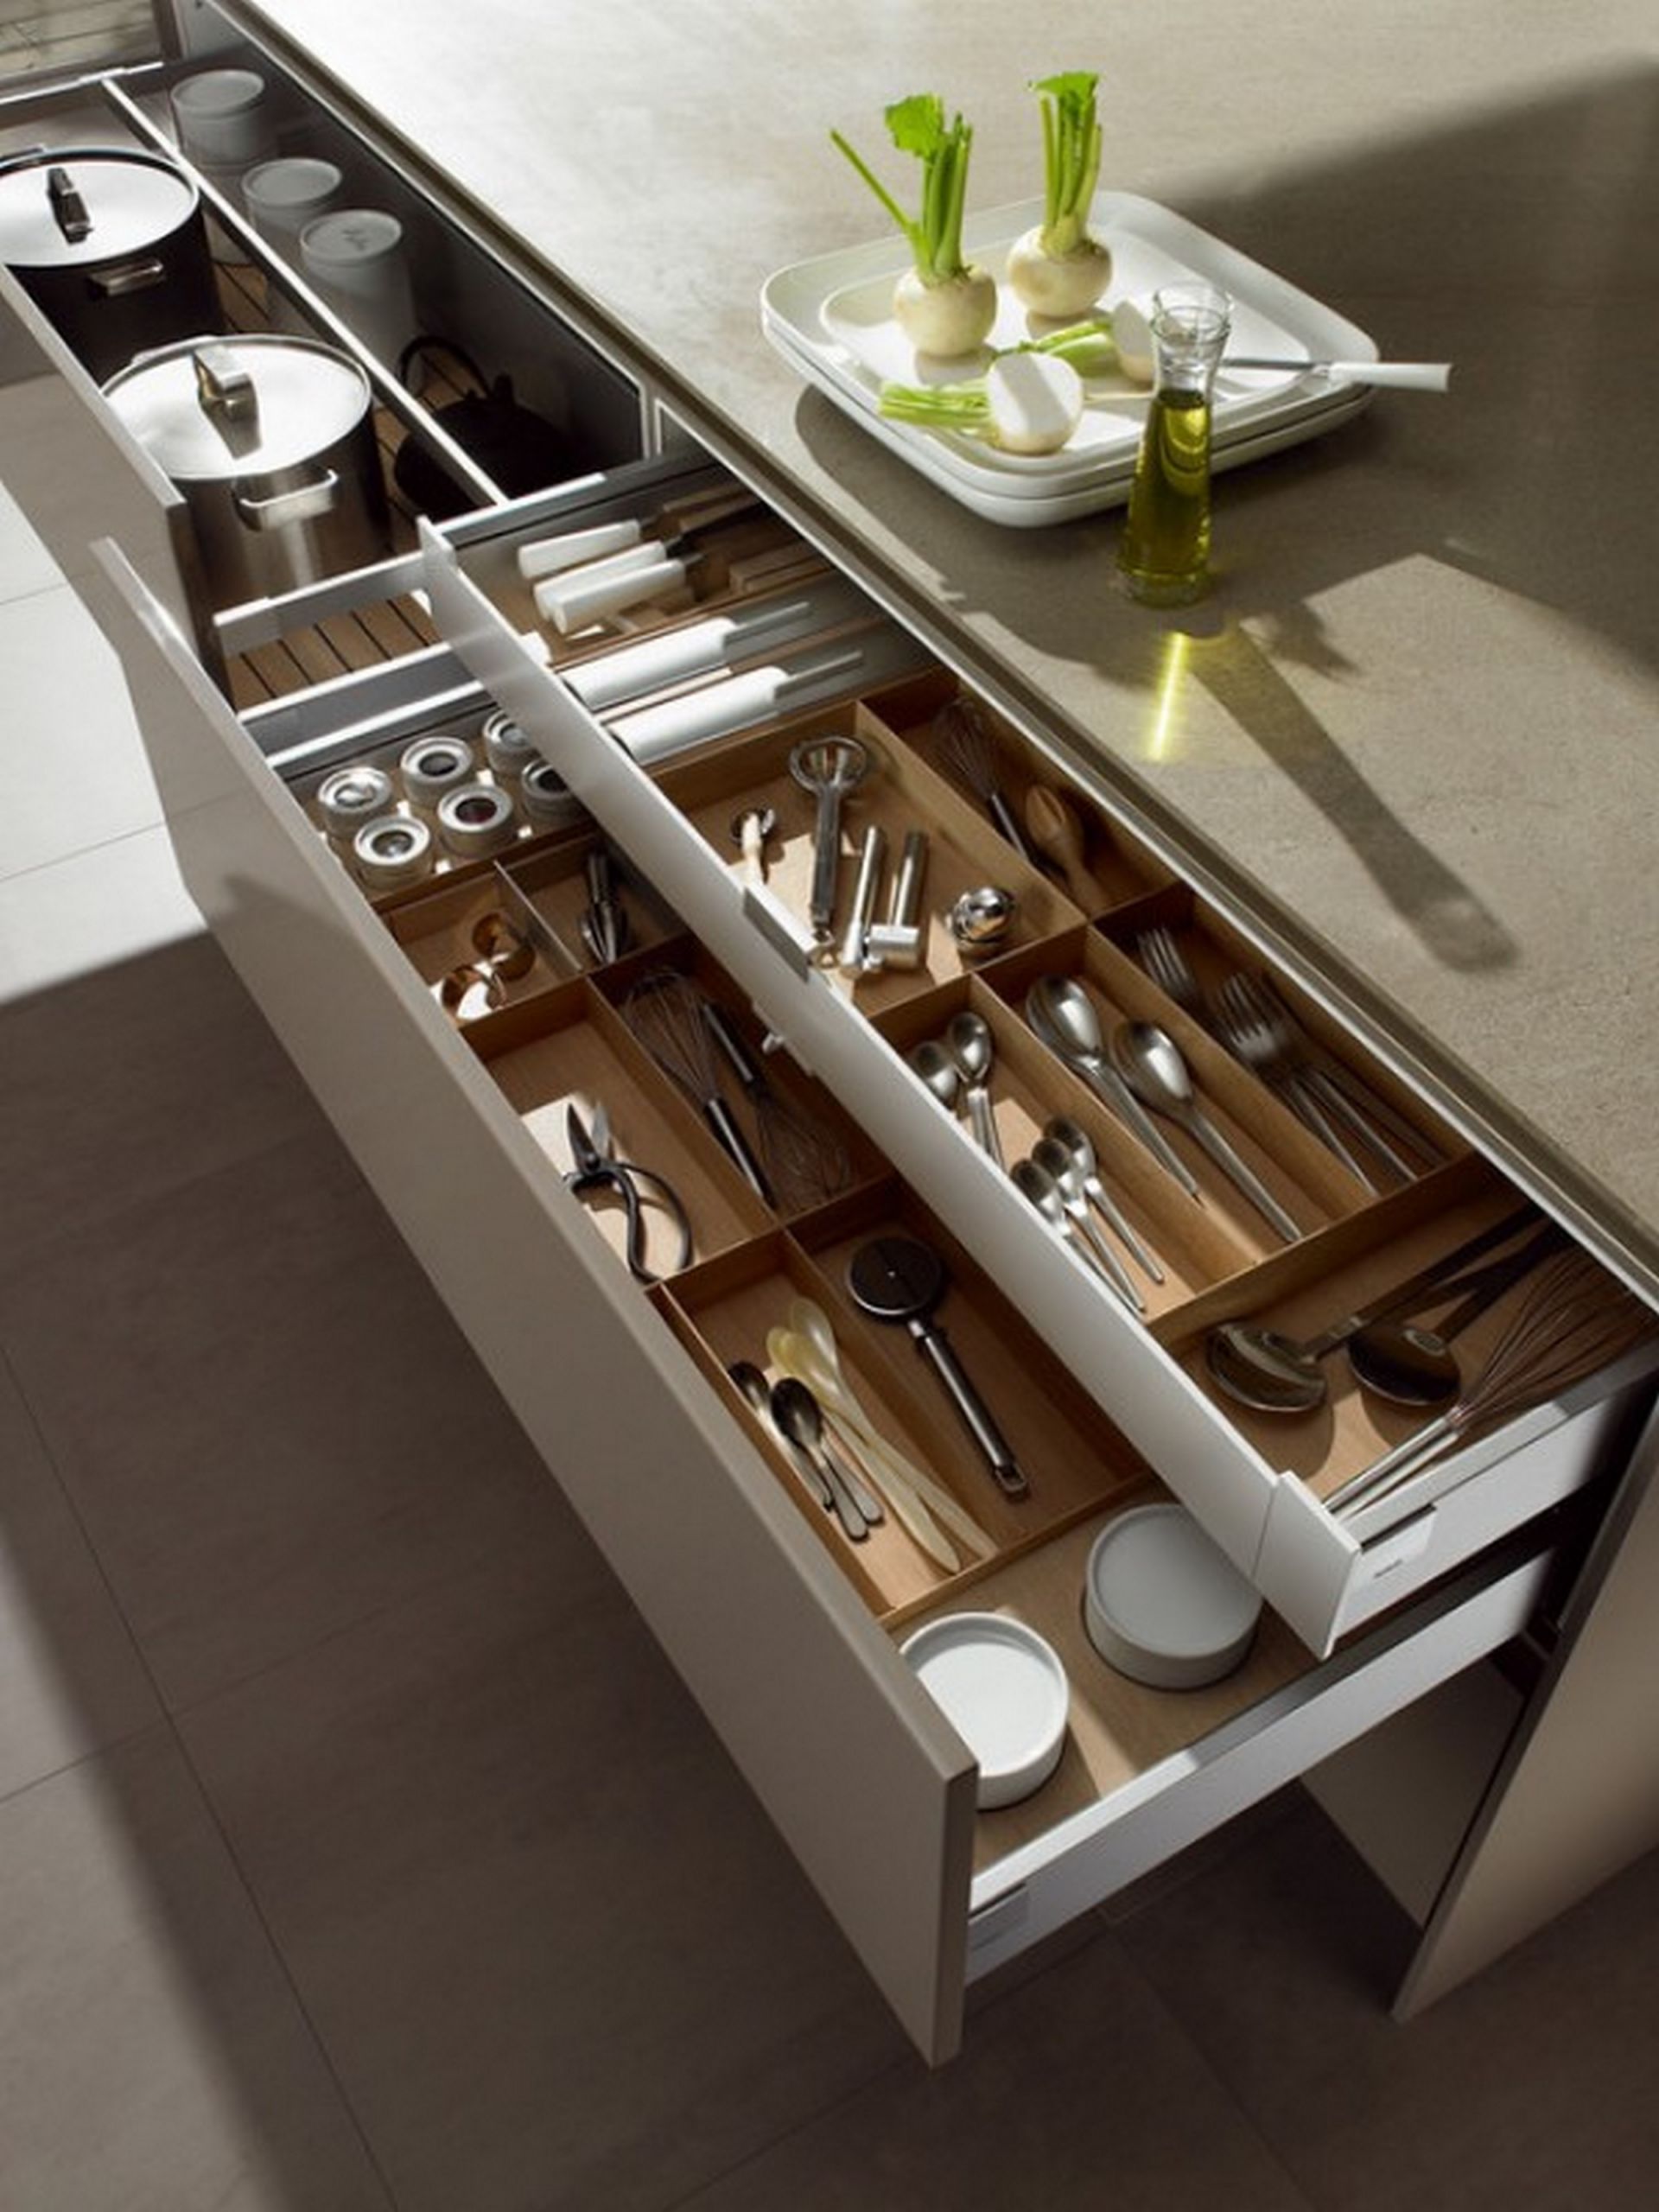 Kitchen Drawer Organizing
 Tips for Perfectly Organized Kitchen Drawers